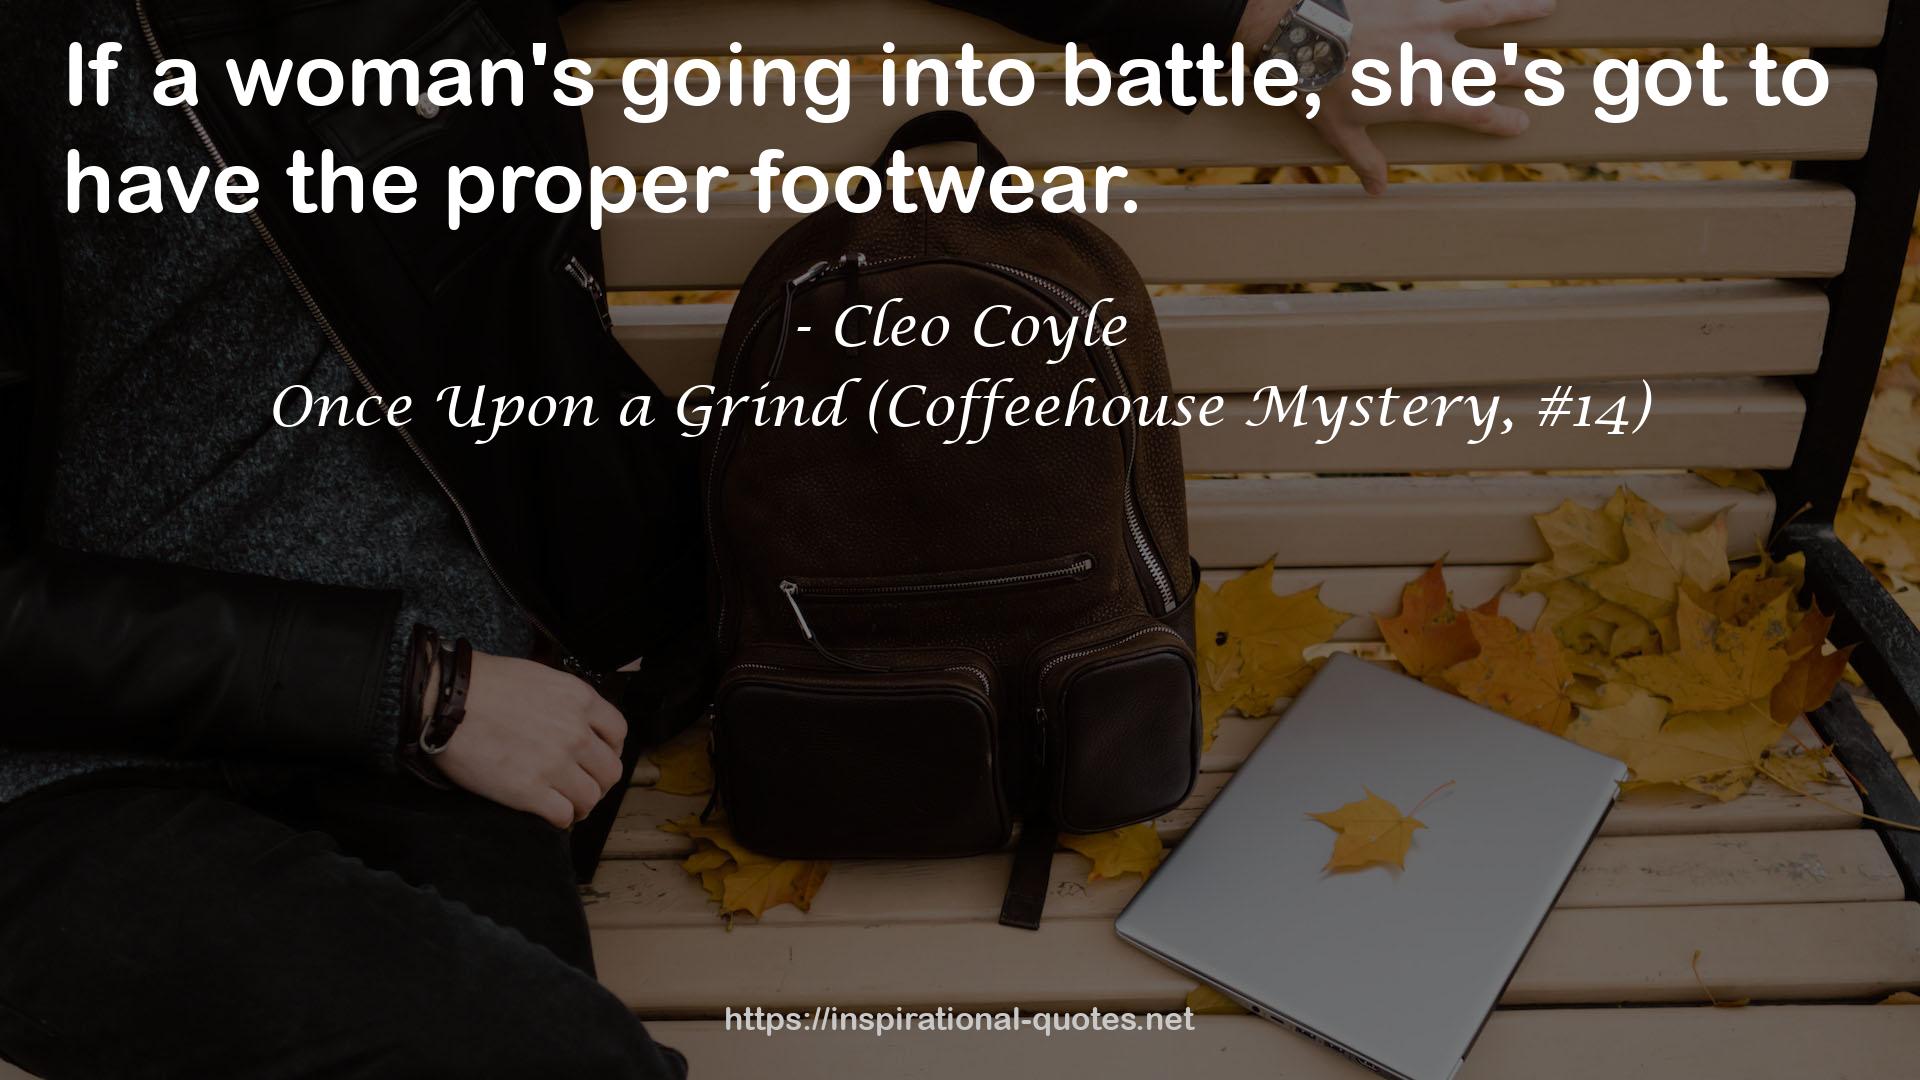 Once Upon a Grind (Coffeehouse Mystery, #14) QUOTES